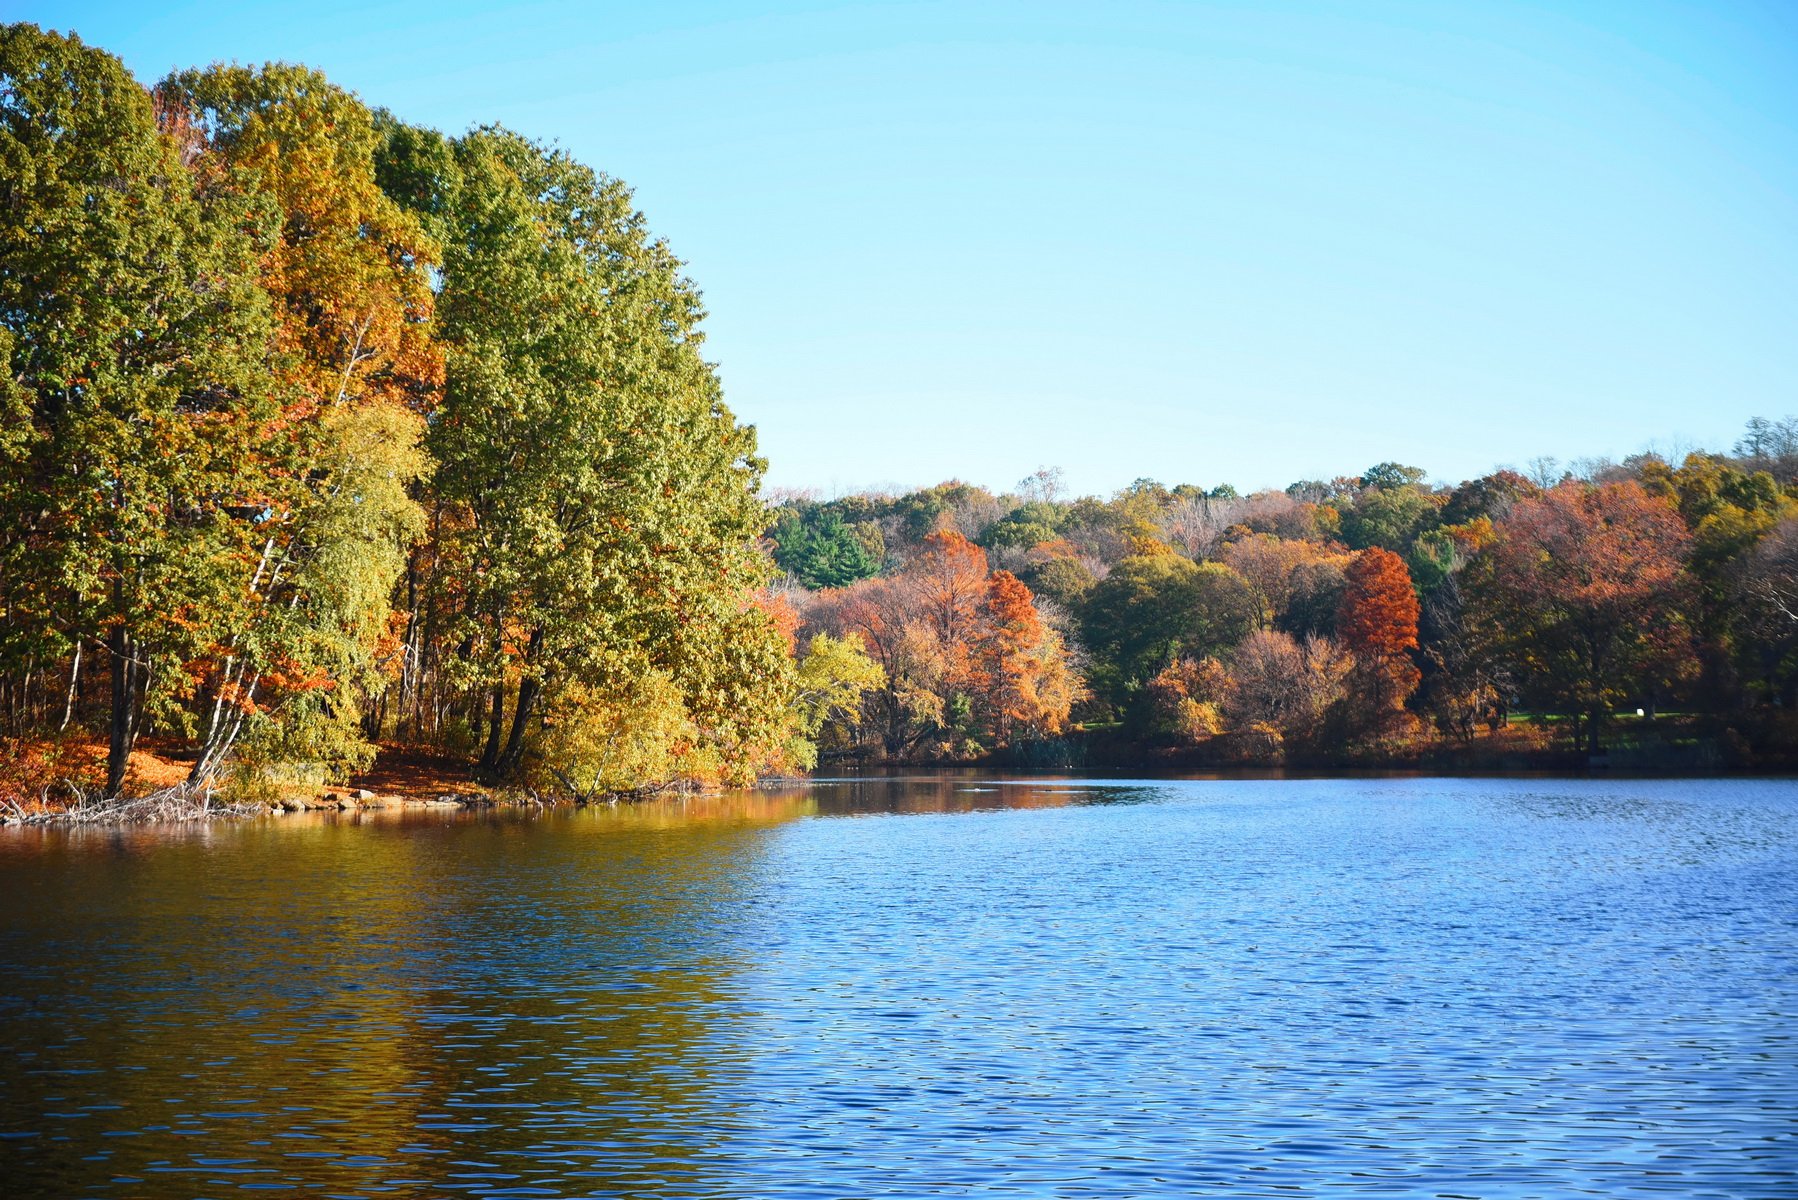 NYC Parks on X: Good morning from Van Cortlandt Park #intheBronx